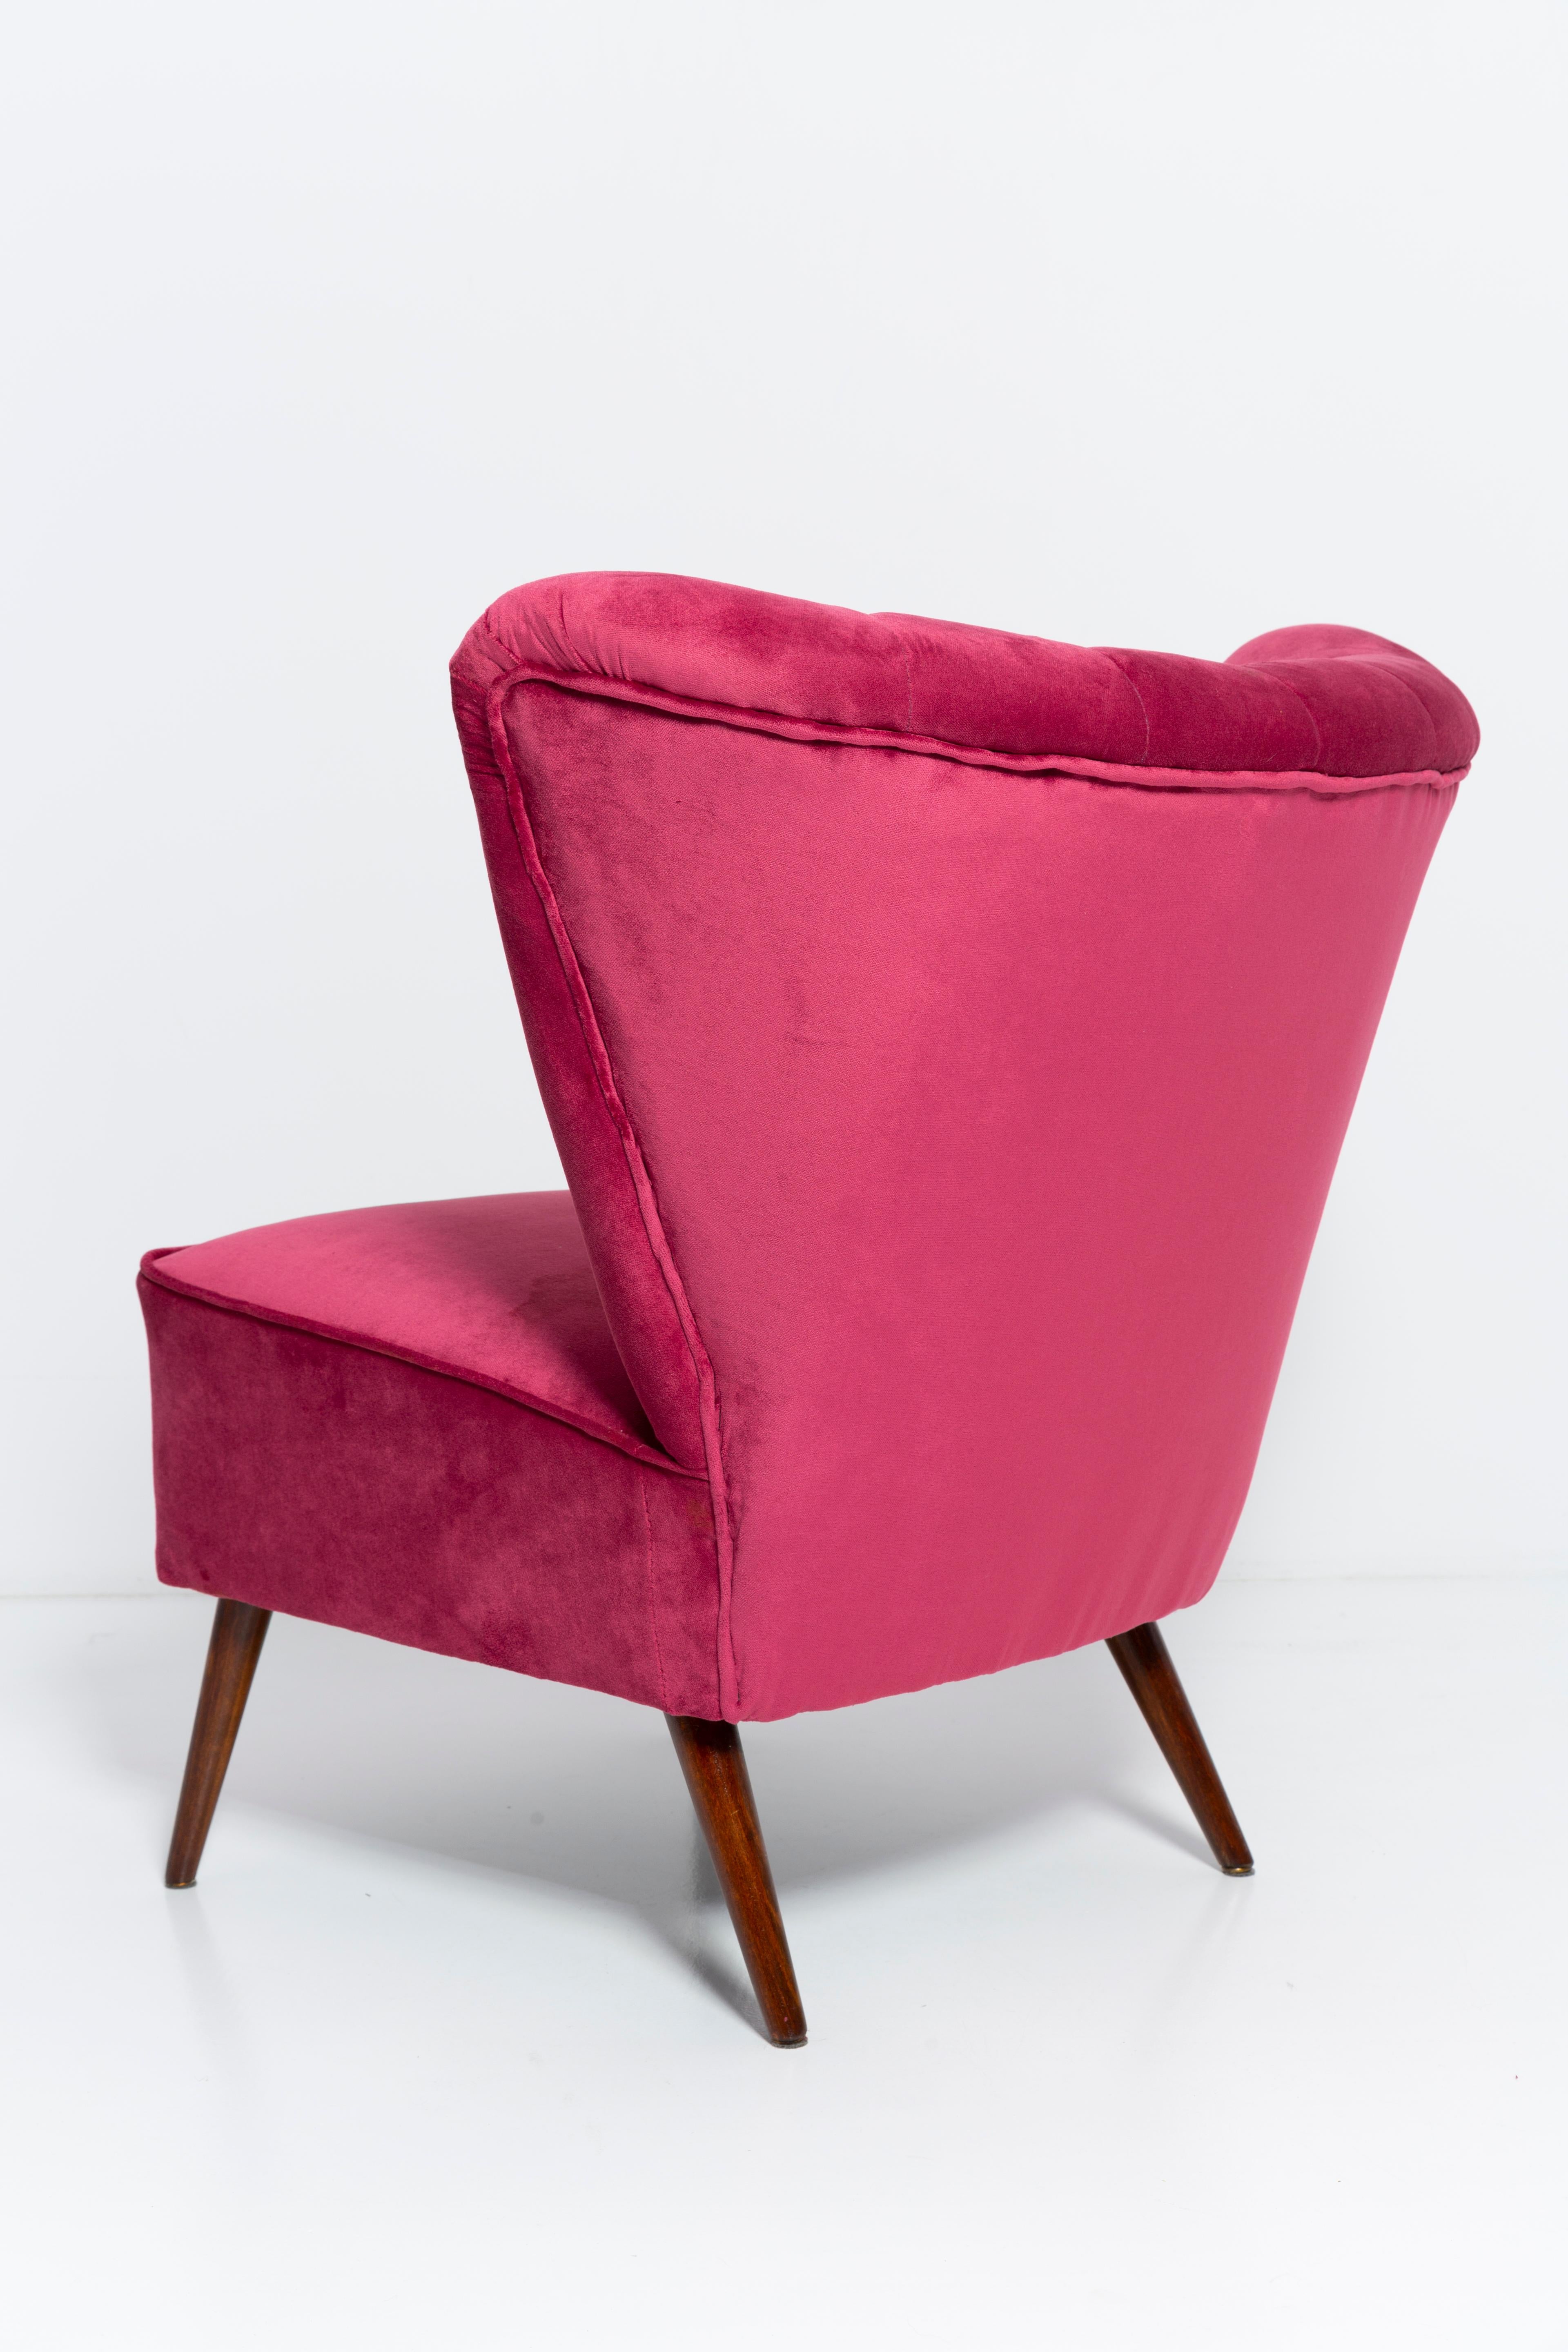 Four Midcentury Magenta Pink Velvet Club Armchairs, Europe, 1960s For Sale 5